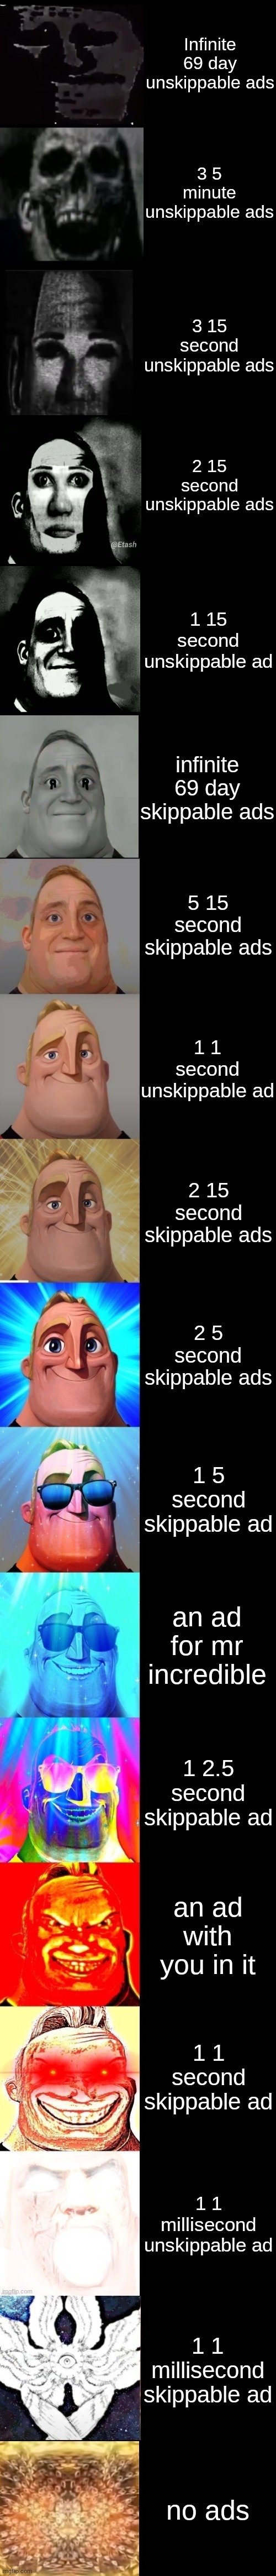 When you get the ad |  Infinite 69 day unskippable ads; 3 5 minute unskippable ads; 3 15 second unskippable ads; 2 15 second unskippable ads; 1 15 second unskippable ad; infinite 69 day skippable ads; 5 15 second skippable ads; 1 1 second unskippable ad; 2 15 second skippable ads; 2 5 second skippable ads; 1 5 second skippable ad; an ad for mr incredible; 1 2.5 second skippable ad; an ad with you in it; 1 1 second skippable ad; 1 1 millisecond unskippable ad; 1 1 millisecond skippable ad; no ads | image tagged in mr incredible from trollge to god | made w/ Imgflip meme maker